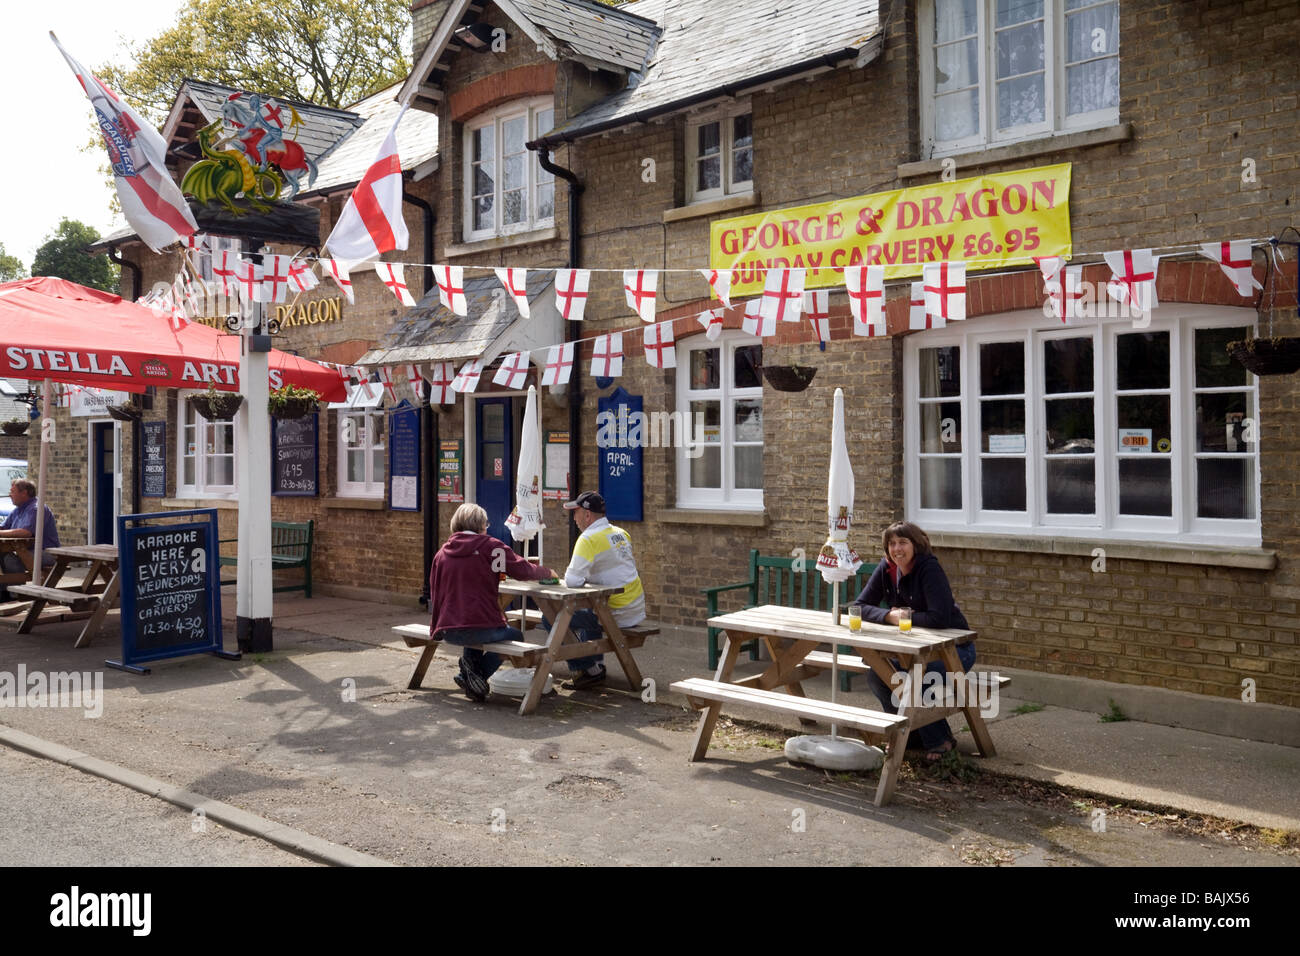 People drinking beer outside the George and Dragon pub, on St Georges day, Snailwell, Cambridgeshire UK Stock Photo